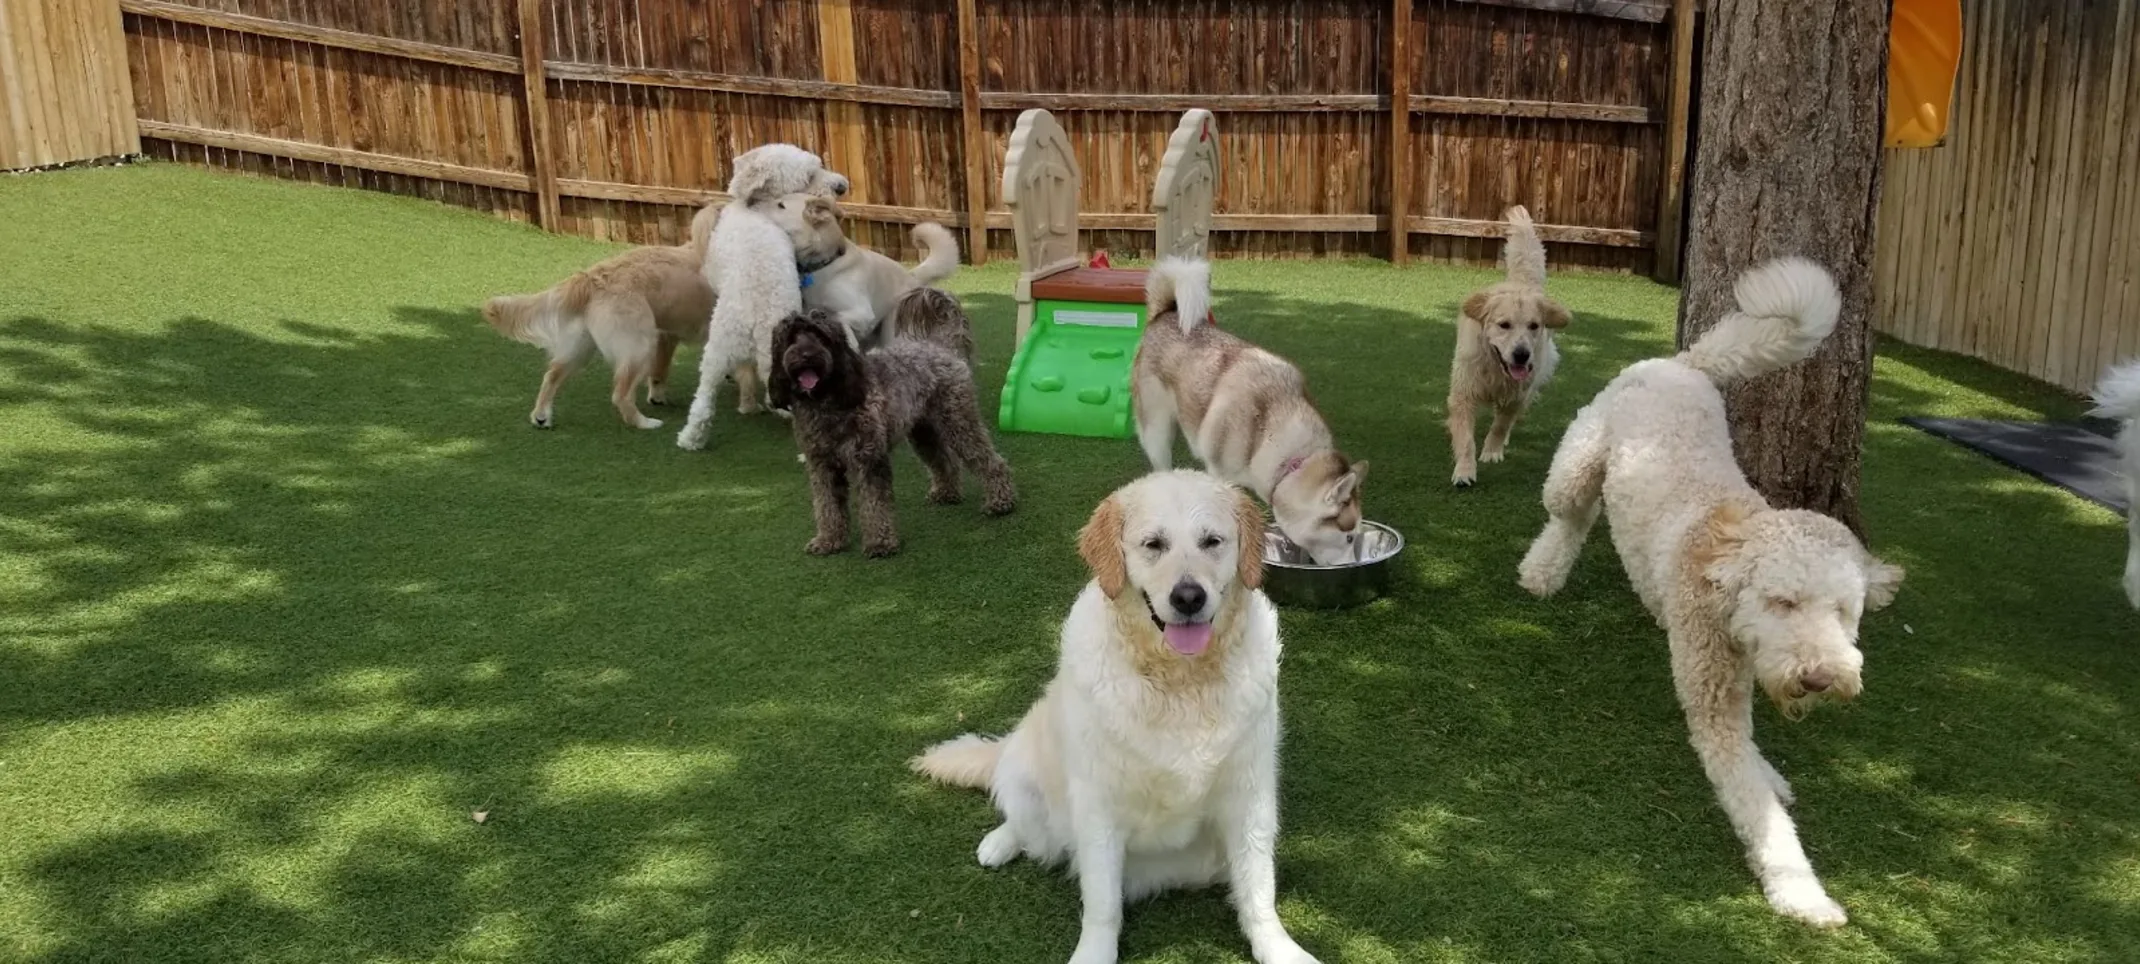 Group of Dogs In A Yard